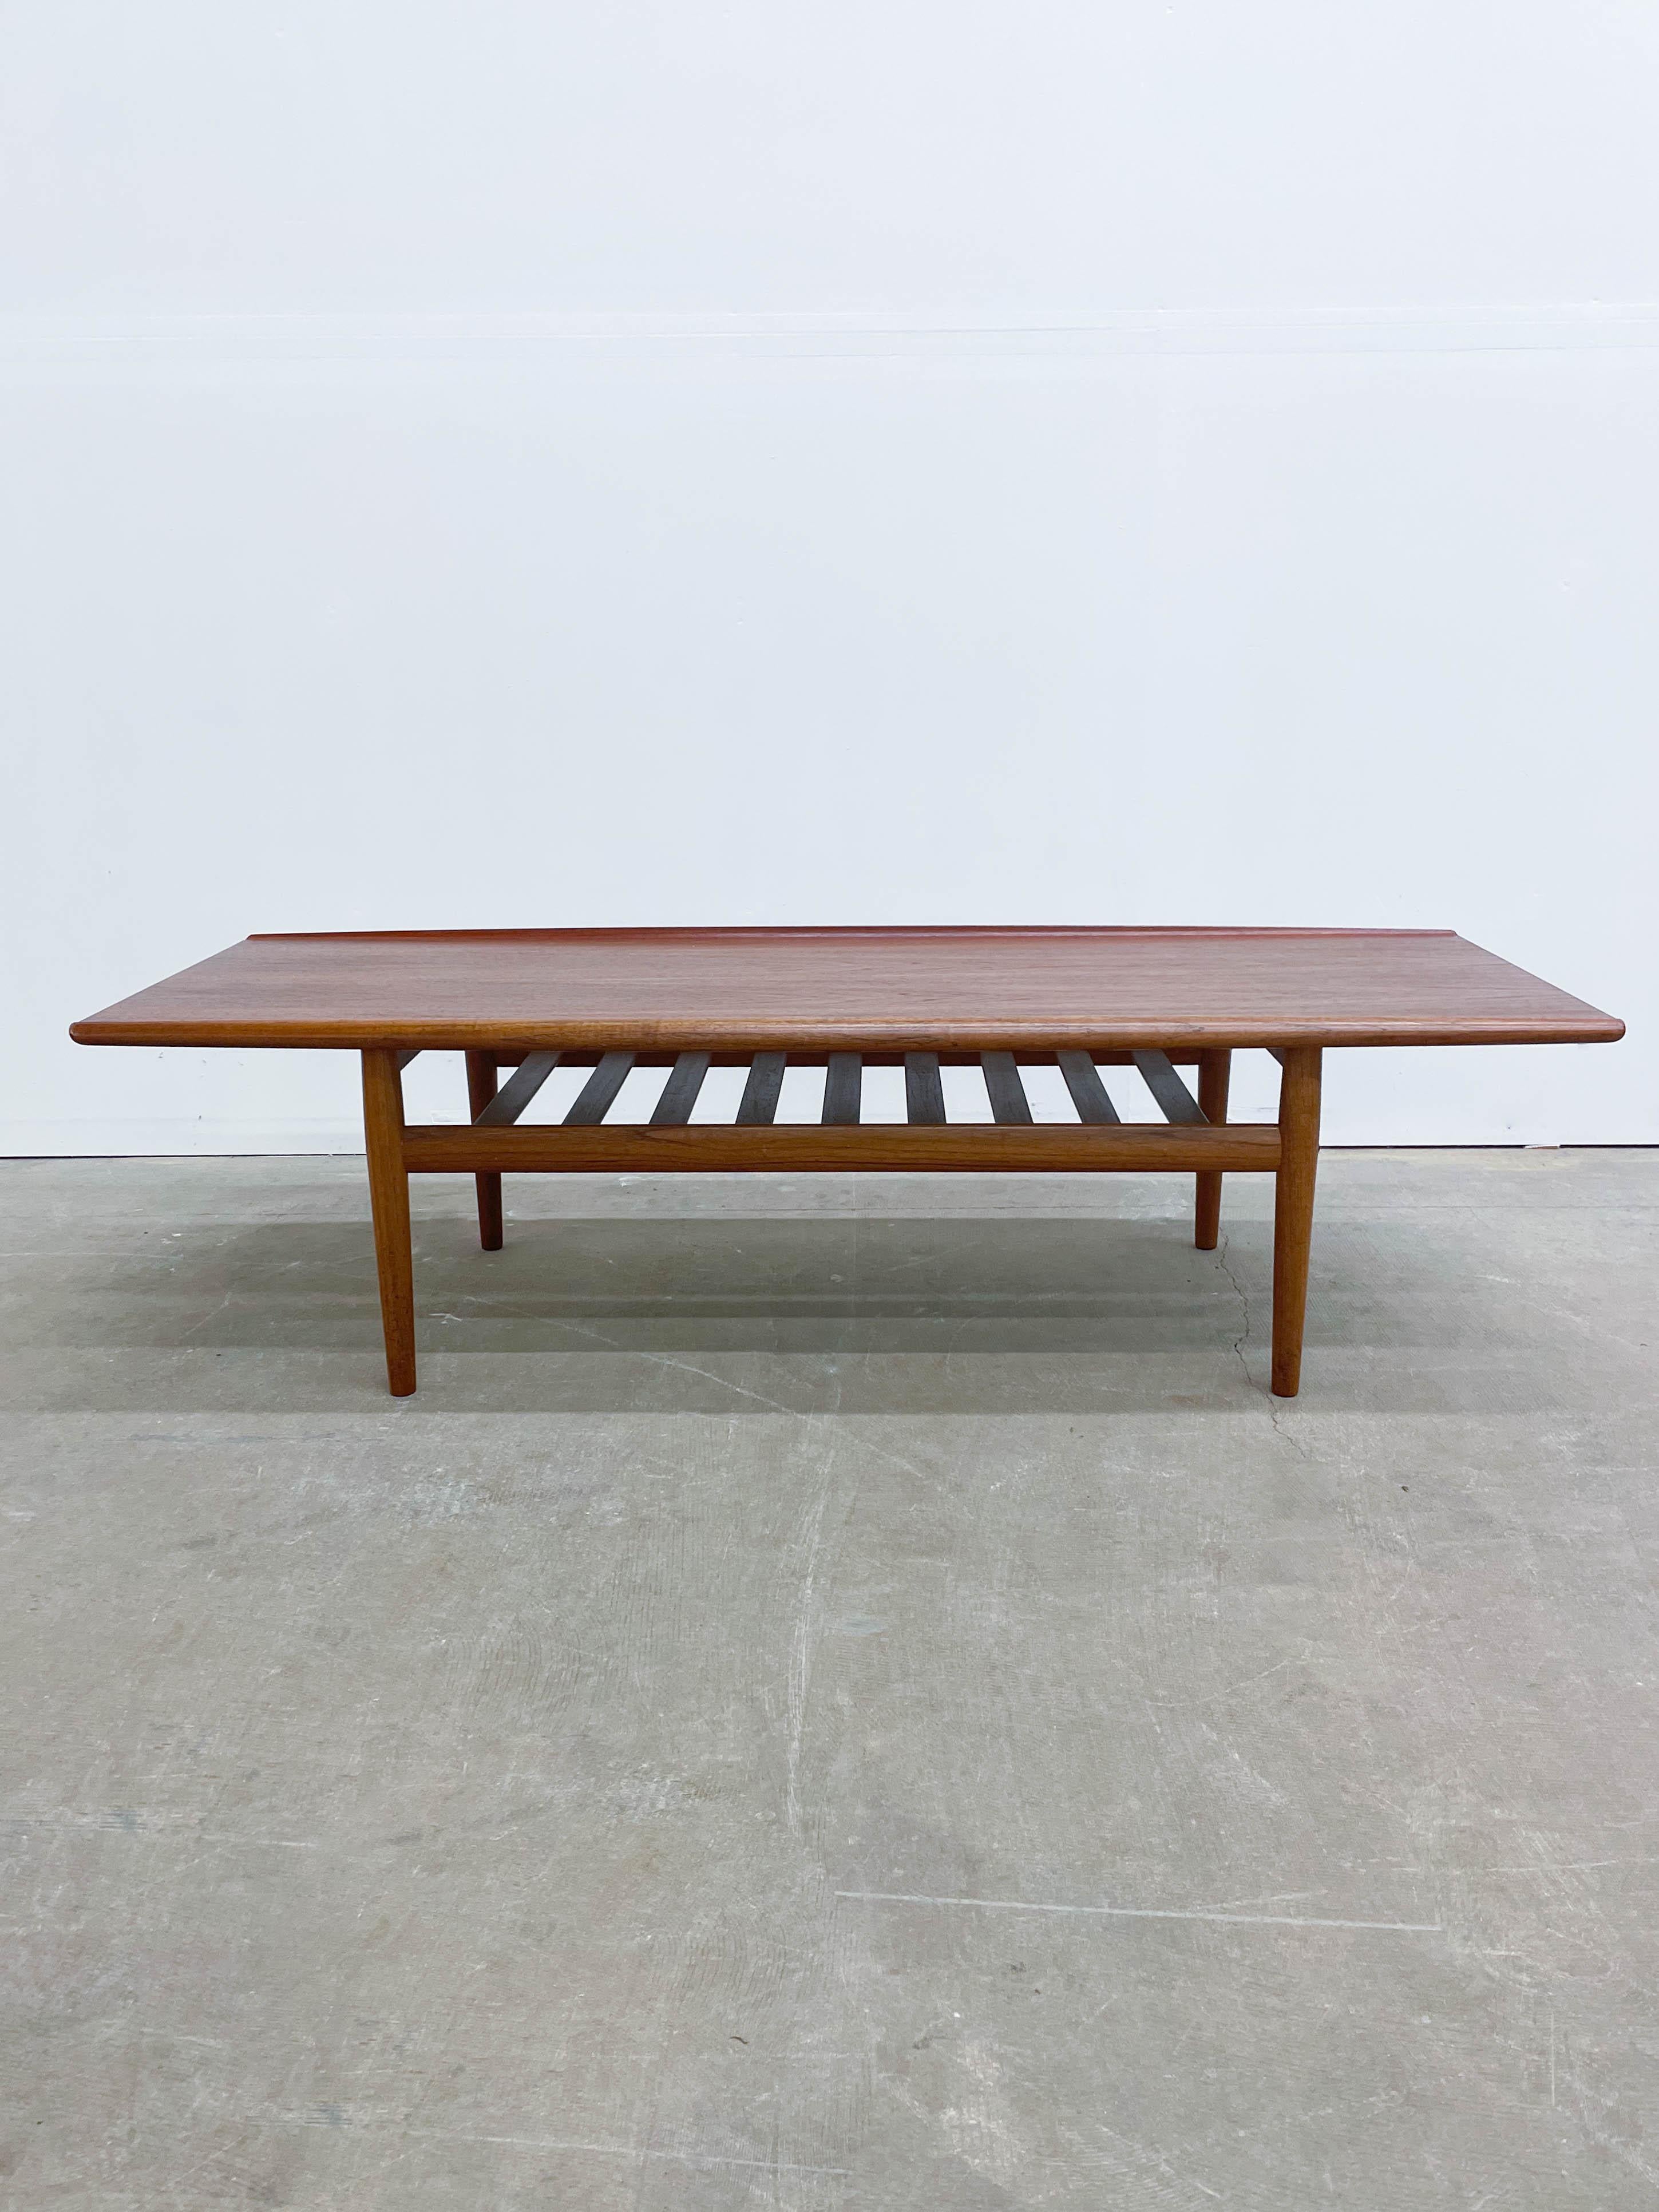 This beautiful Danish Modern Teak coffee table was designed by the iconic Grete Jalk and dates back from the 1960s. Made by Poul Jeppessen in Denmark, this table features an expansive top with rolled edges, superb teak woodgrain, a functional